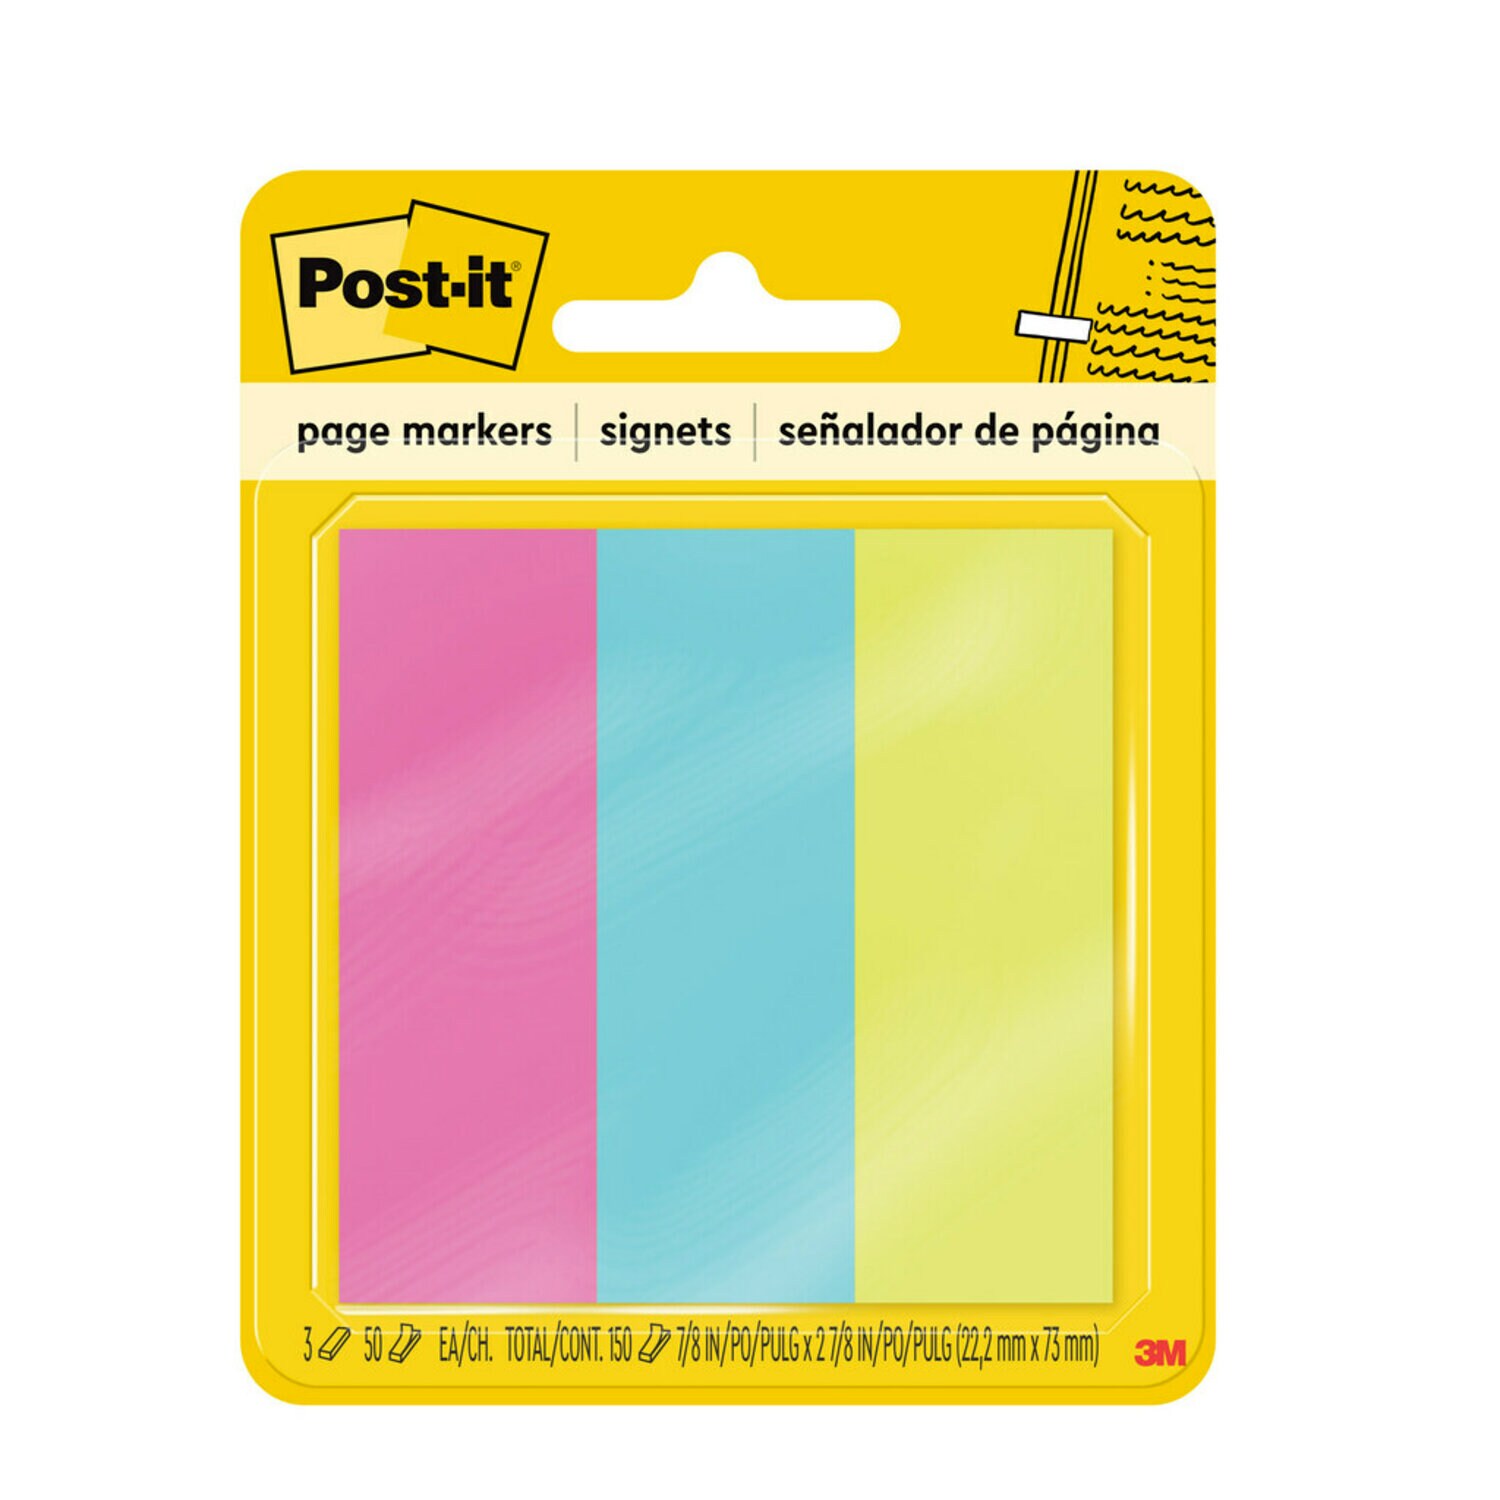 7100089793 - Post-it Page Markers 5223, 7/8 in x 2 7/8 in (22.2 mm x 73 mm), Assorted Bright Colors